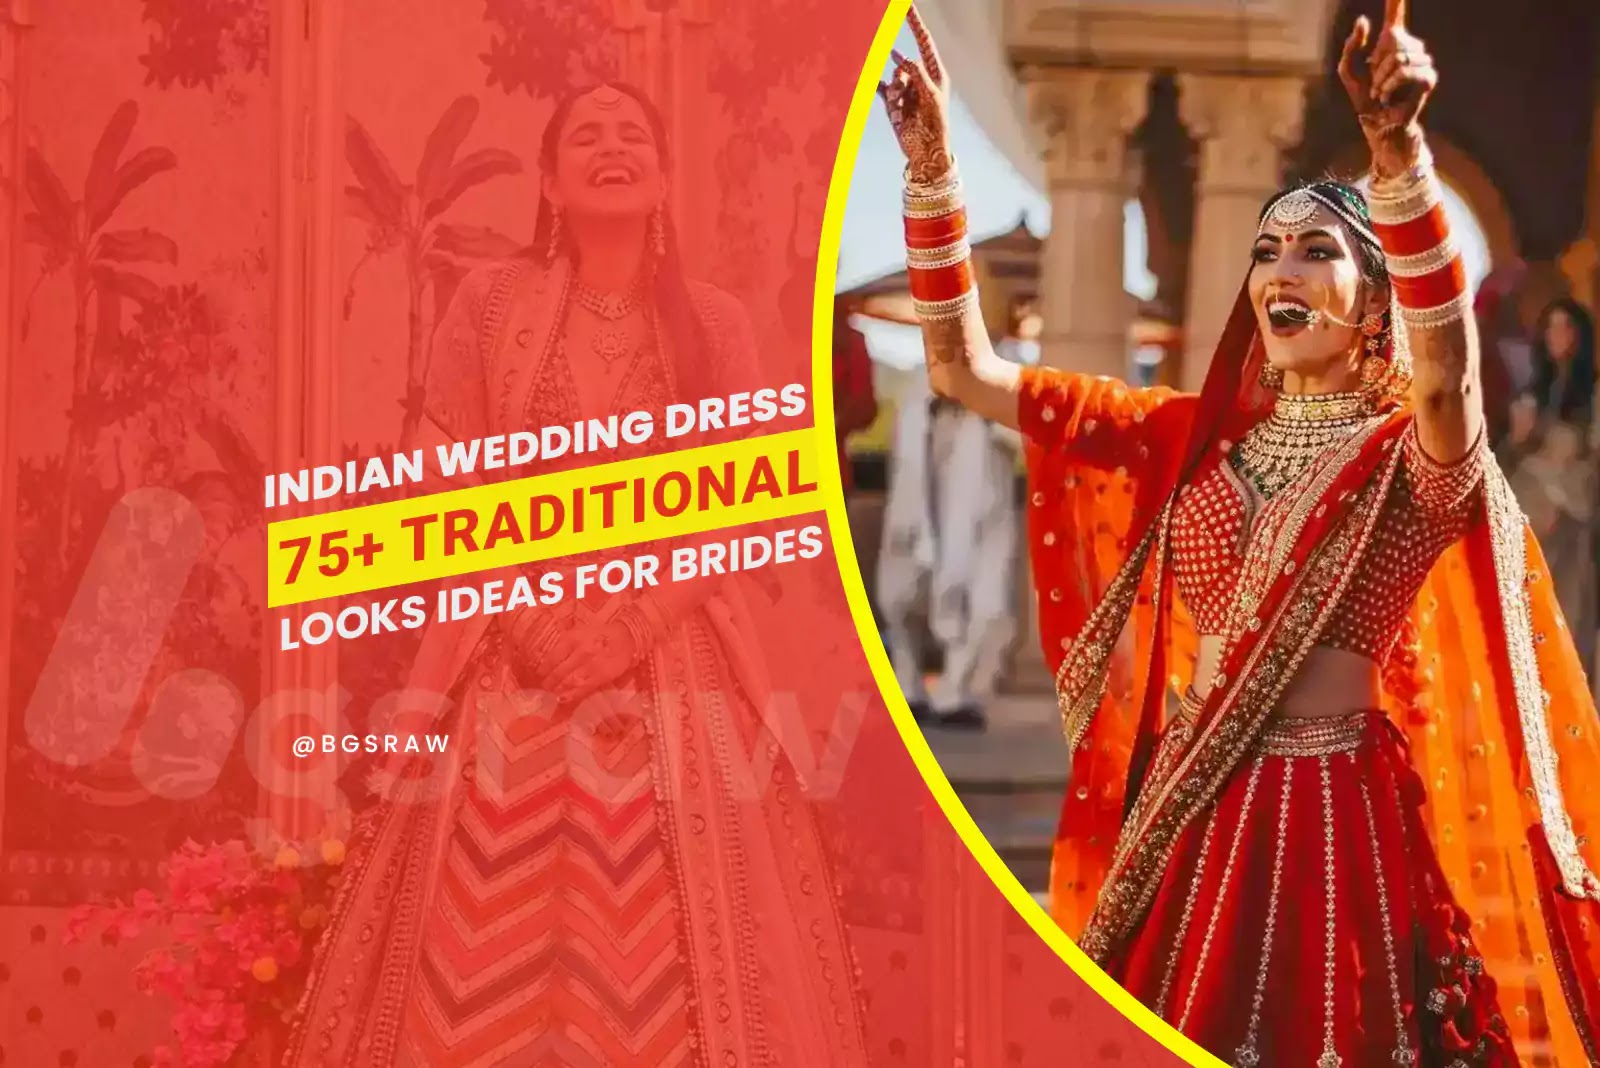 Indian Wedding Dress Ideas for Brides, 75+ Traditional Looks